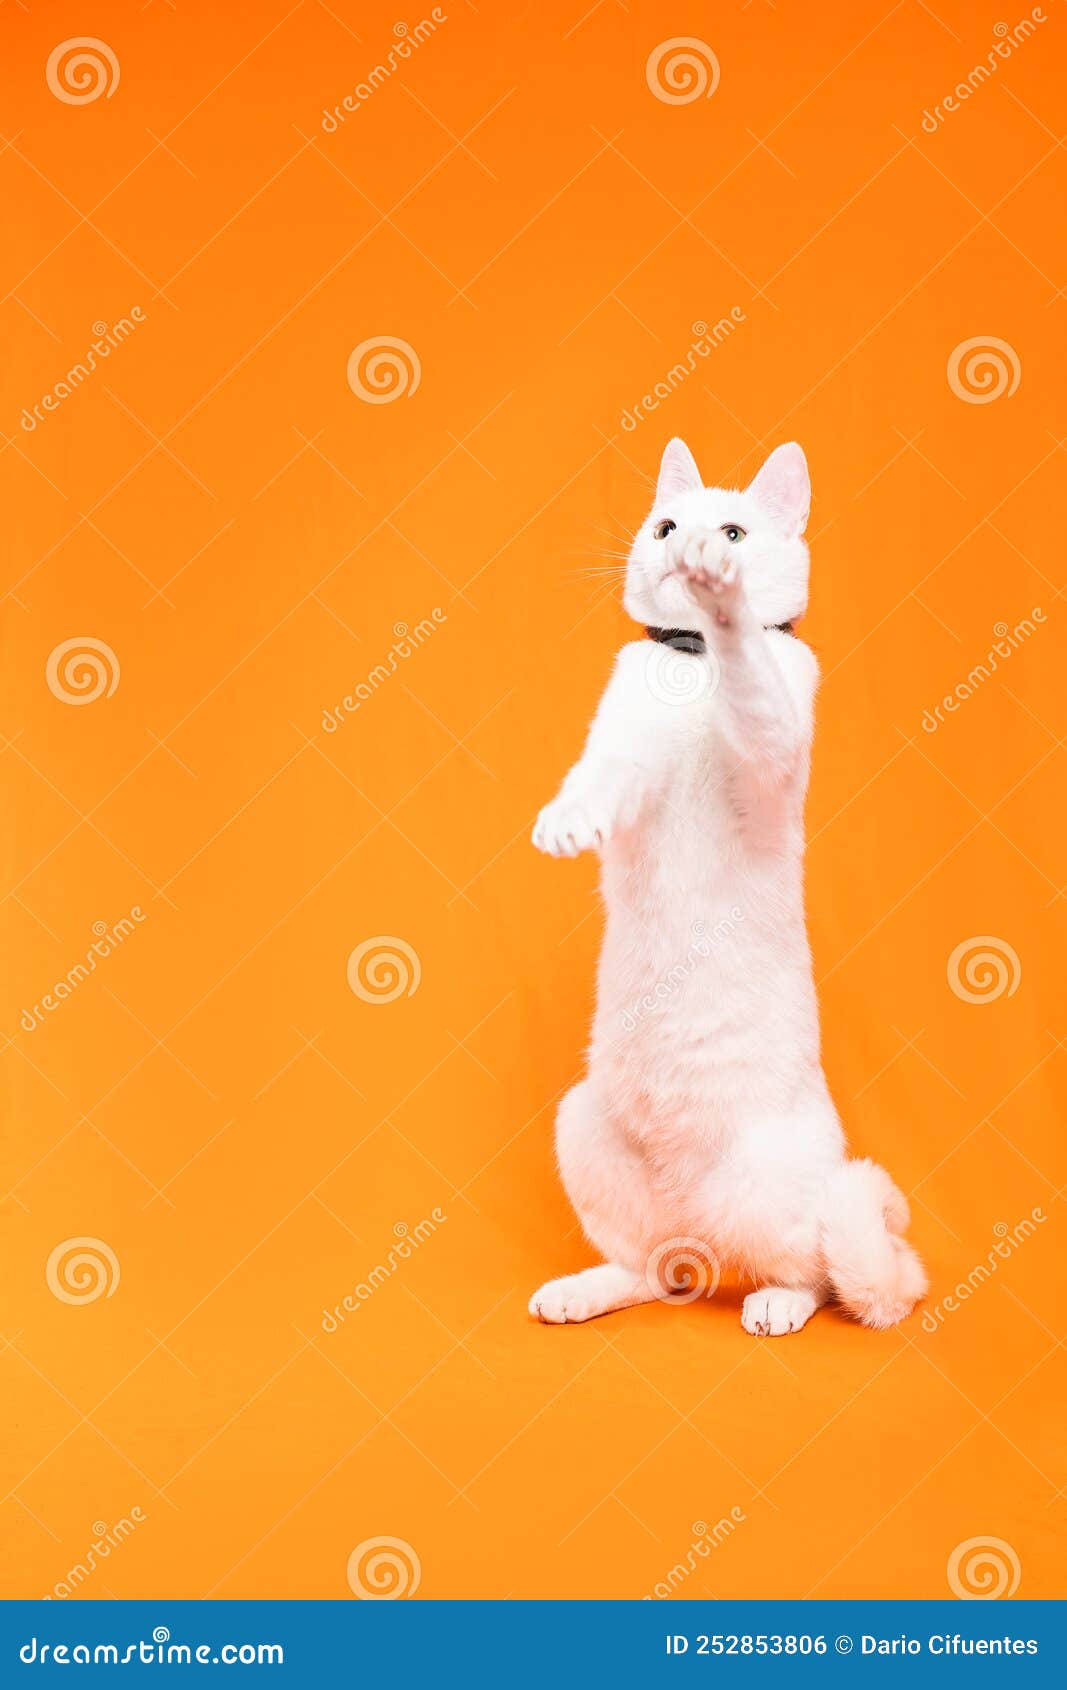 small white cat stands on two legs to reach something, orange background